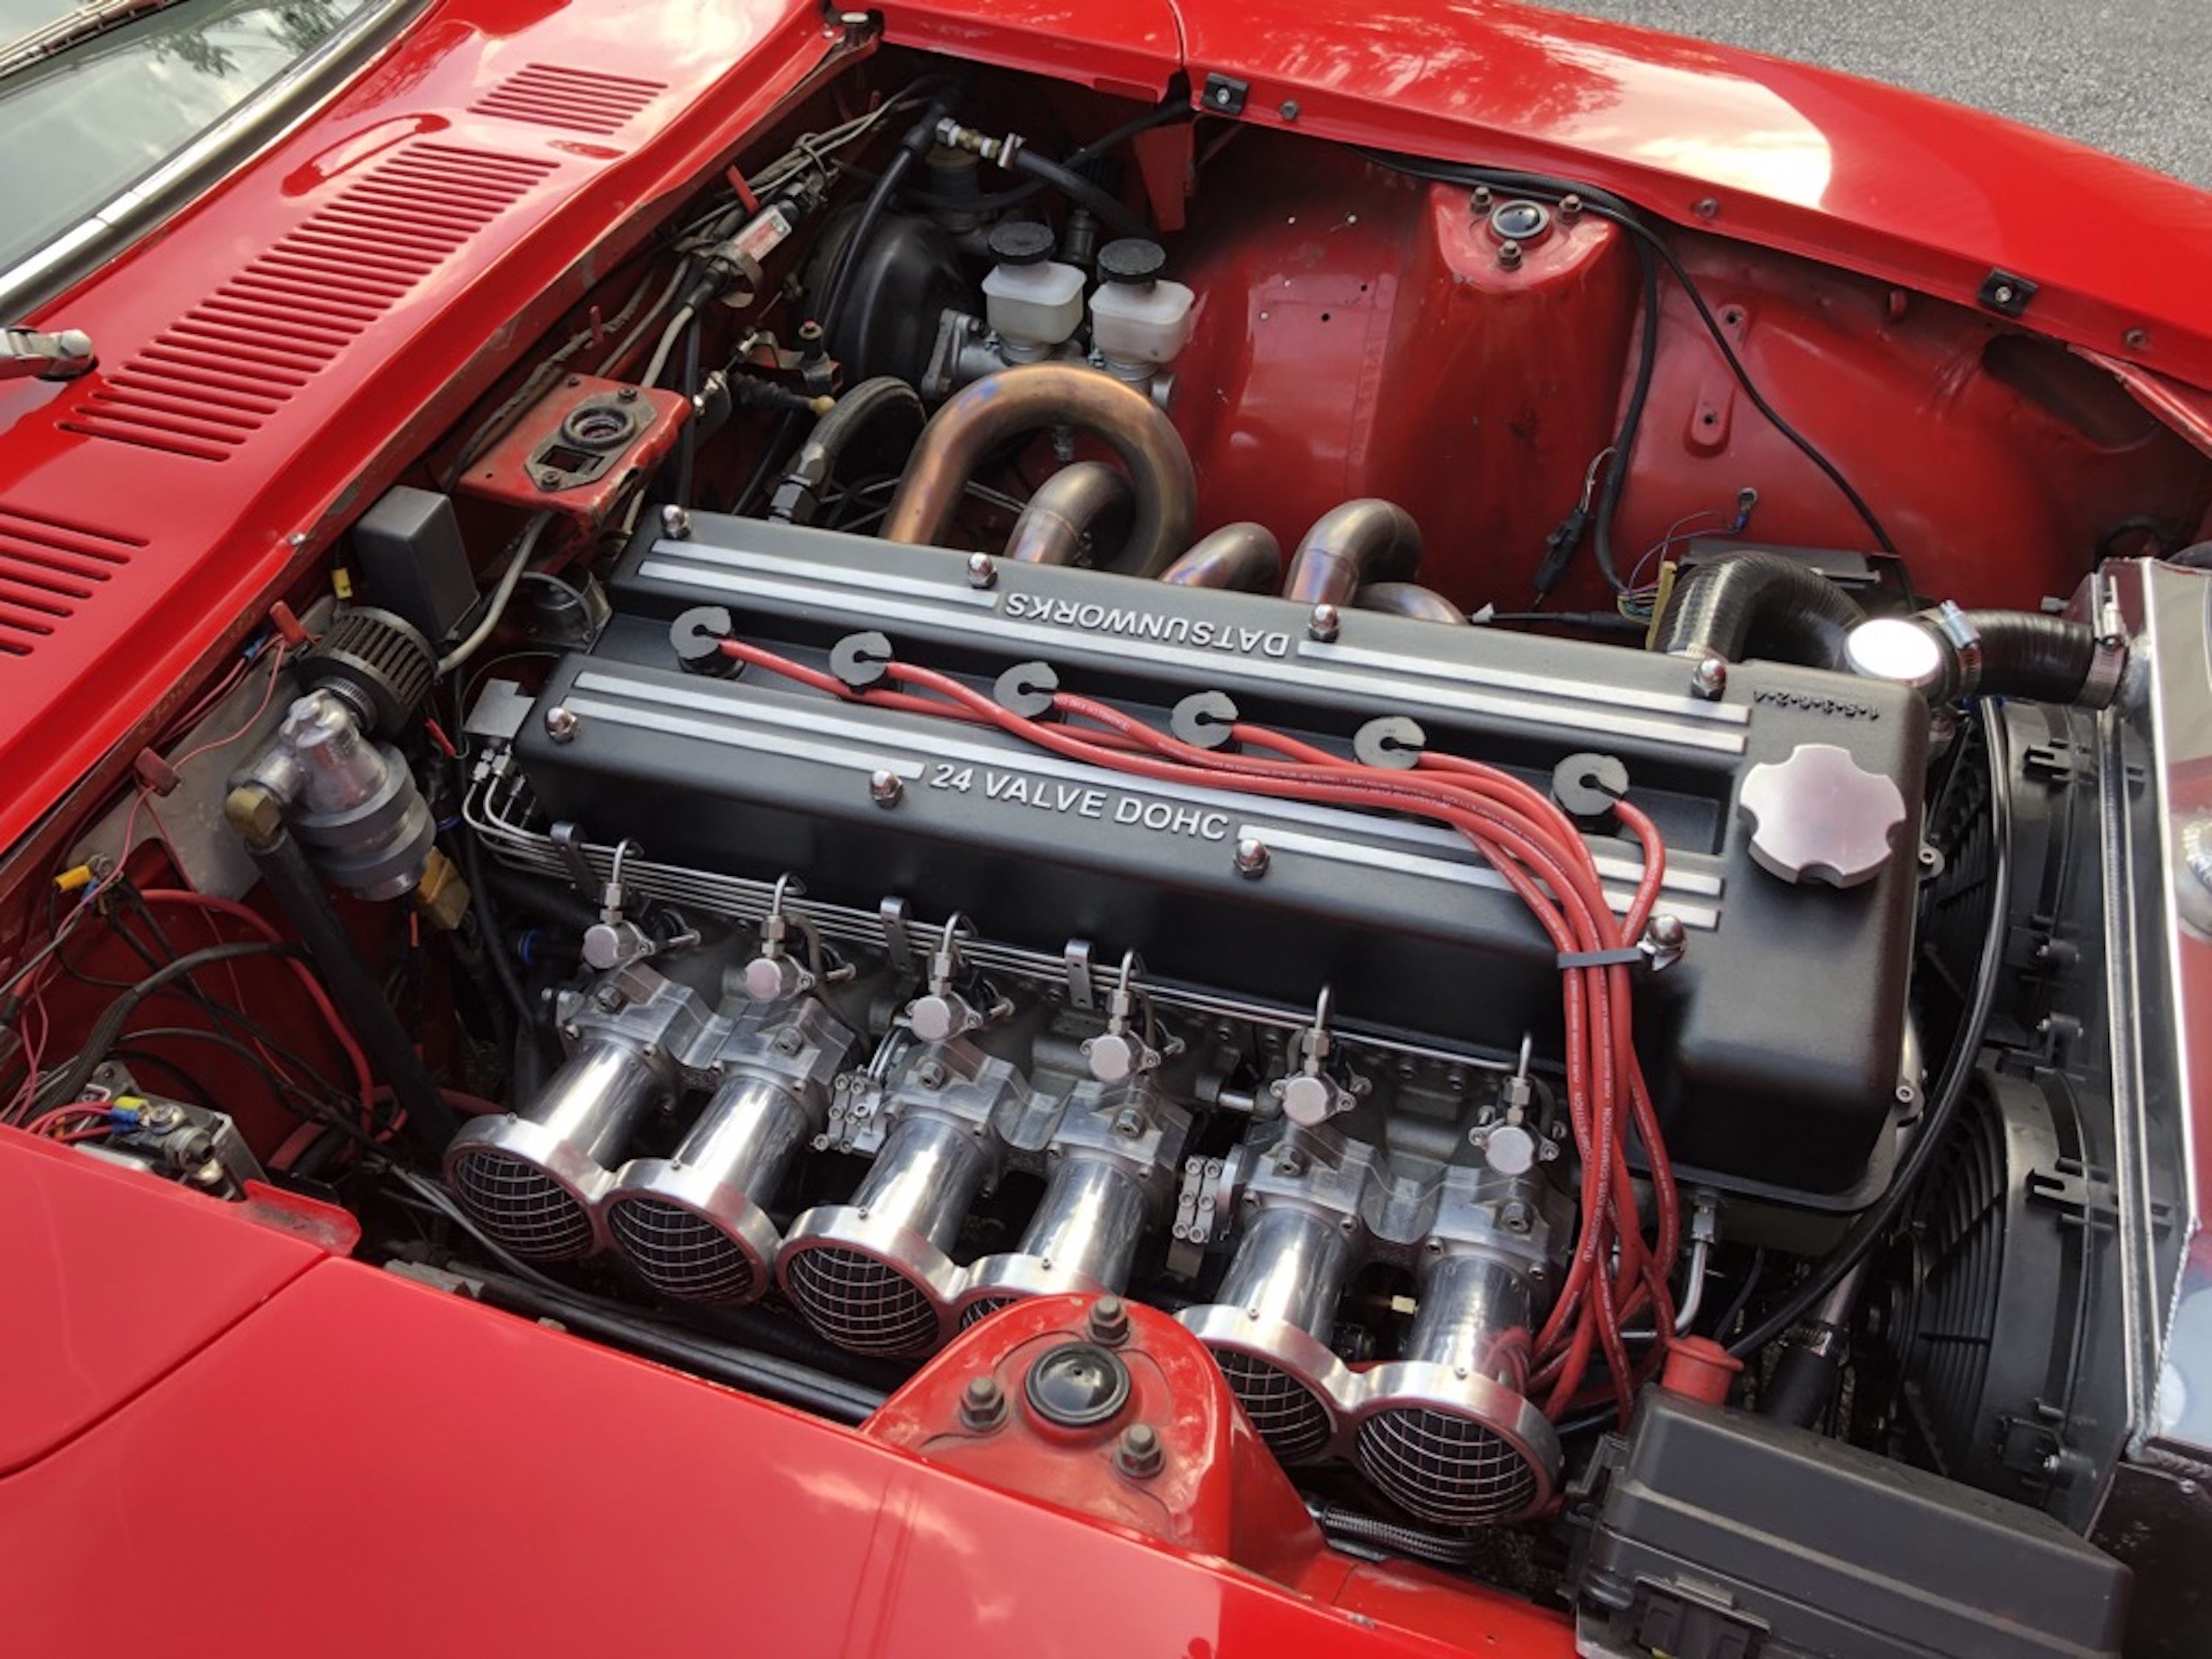 The Datsunworks KN20 Head Brings DOHC to the 240Z